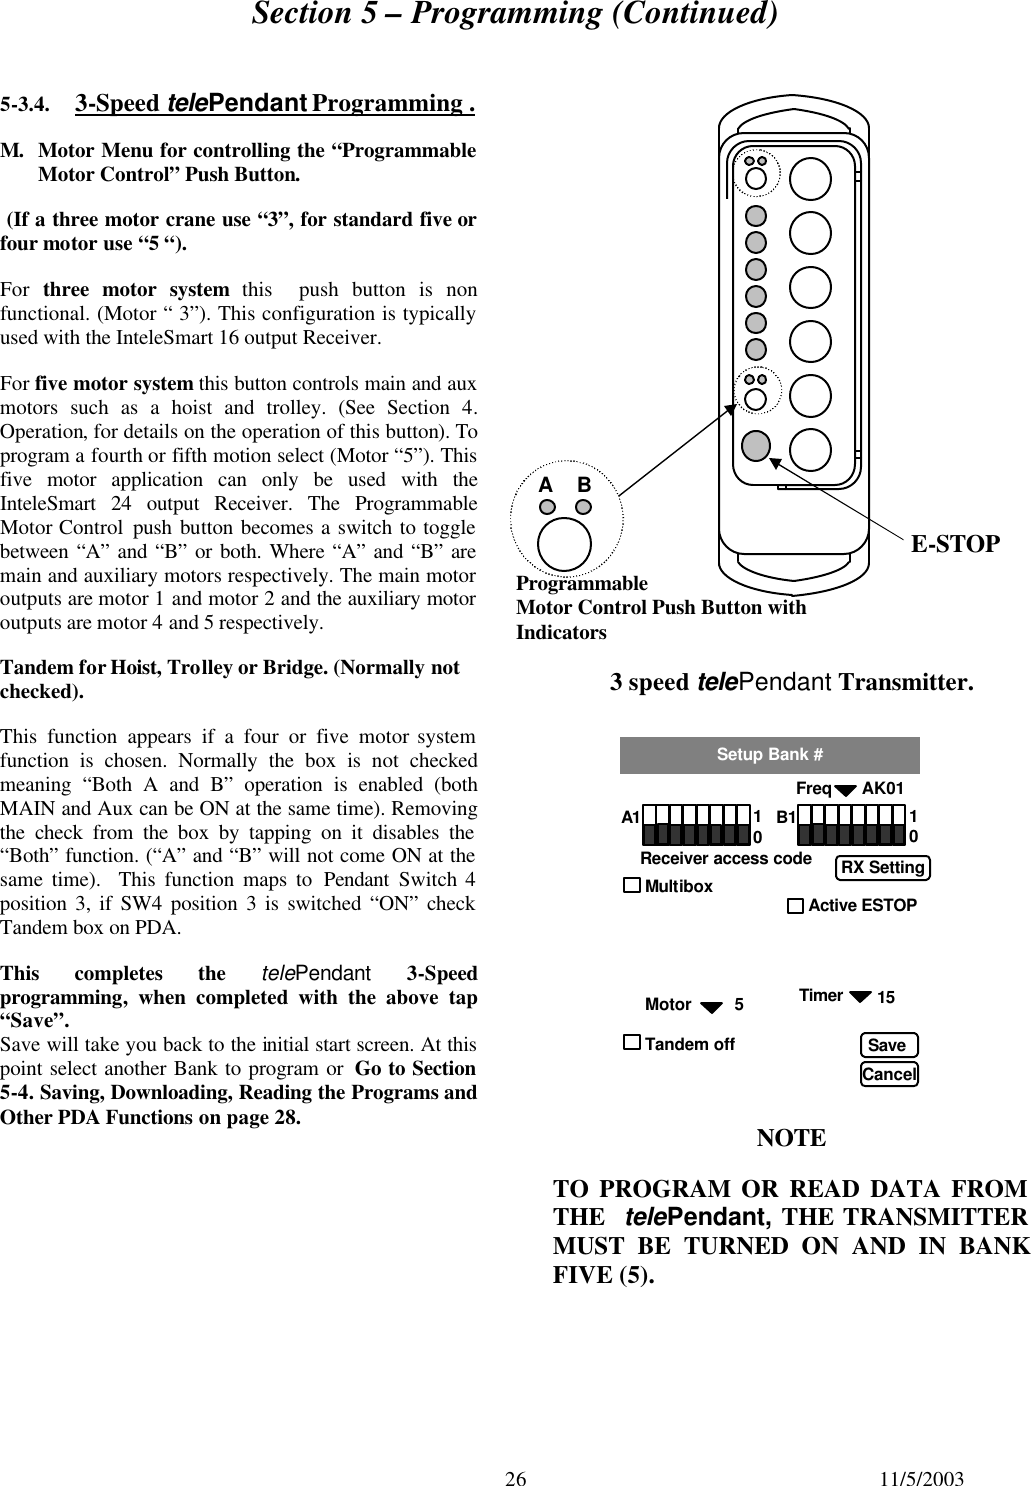 Section 5 – Programming (Continued)  26 11/5/2003 5-3.4. 3-Speed telePendant Programming . M. Motor Menu for controlling the “Programmable Motor Control” Push Button.  (If a three motor crane use “3”, for standard five or four motor use “5 “). For  three motor system this  push button is non functional. (Motor “ 3”). This configuration is typically used with the InteleSmart 16 output Receiver. For five motor system this button controls main and aux motors such as a hoist and trolley. (See  Section  4. Operation, for details on the operation of this button). To program a fourth or fifth motion select (Motor “5”). This five motor application can only be used with the InteleSmart 24 output Receiver. The Programmable Motor Control push button becomes a switch to toggle between “A” and “B” or both. Where “A” and “B” are main and auxiliary motors respectively. The main motor outputs are motor 1 and motor 2 and the auxiliary motor outputs are motor 4 and 5 respectively.  Tandem for Hoist, Trolley or Bridge. (Normally not checked). This function appears if a four or five motor system function is chosen. Normally the box is not  checked meaning “Both A and B” operation is enabled (both MAIN and Aux can be ON at the same time). Removing the check from the box by tapping on it disables the “Both” function. (“A” and “B” will not come ON at the same time).  This function maps to Pendant Switch 4 position 3, if SW4 position 3 is switched “ON” check Tandem box on PDA.  This completes the telePendant 3-Speed programming, when completed with the above tap “Save”. Save will take you back to the initial start screen. At this point select another Bank to program or  Go to Section 5-4. Saving, Downloading, Reading the Programs and Other PDA Functions on page 28.                                NOTE TO PROGRAM OR READ DATA FROM THE  telePendant, THE TRANSMITTER MUST BE TURNED ON AND IN BANK FIVE (5). E-STOP  3 speed telePendant Transmitter. Programmable Motor Control Push Button with Indicators  A    B                          Freq AK01 Setup Bank # A1 Receiver access code 1 0 B1 1 0 Timer Save Cancel Multibox                                      Active ESTOP    Motor         5 Tandem off RX Setting 15    